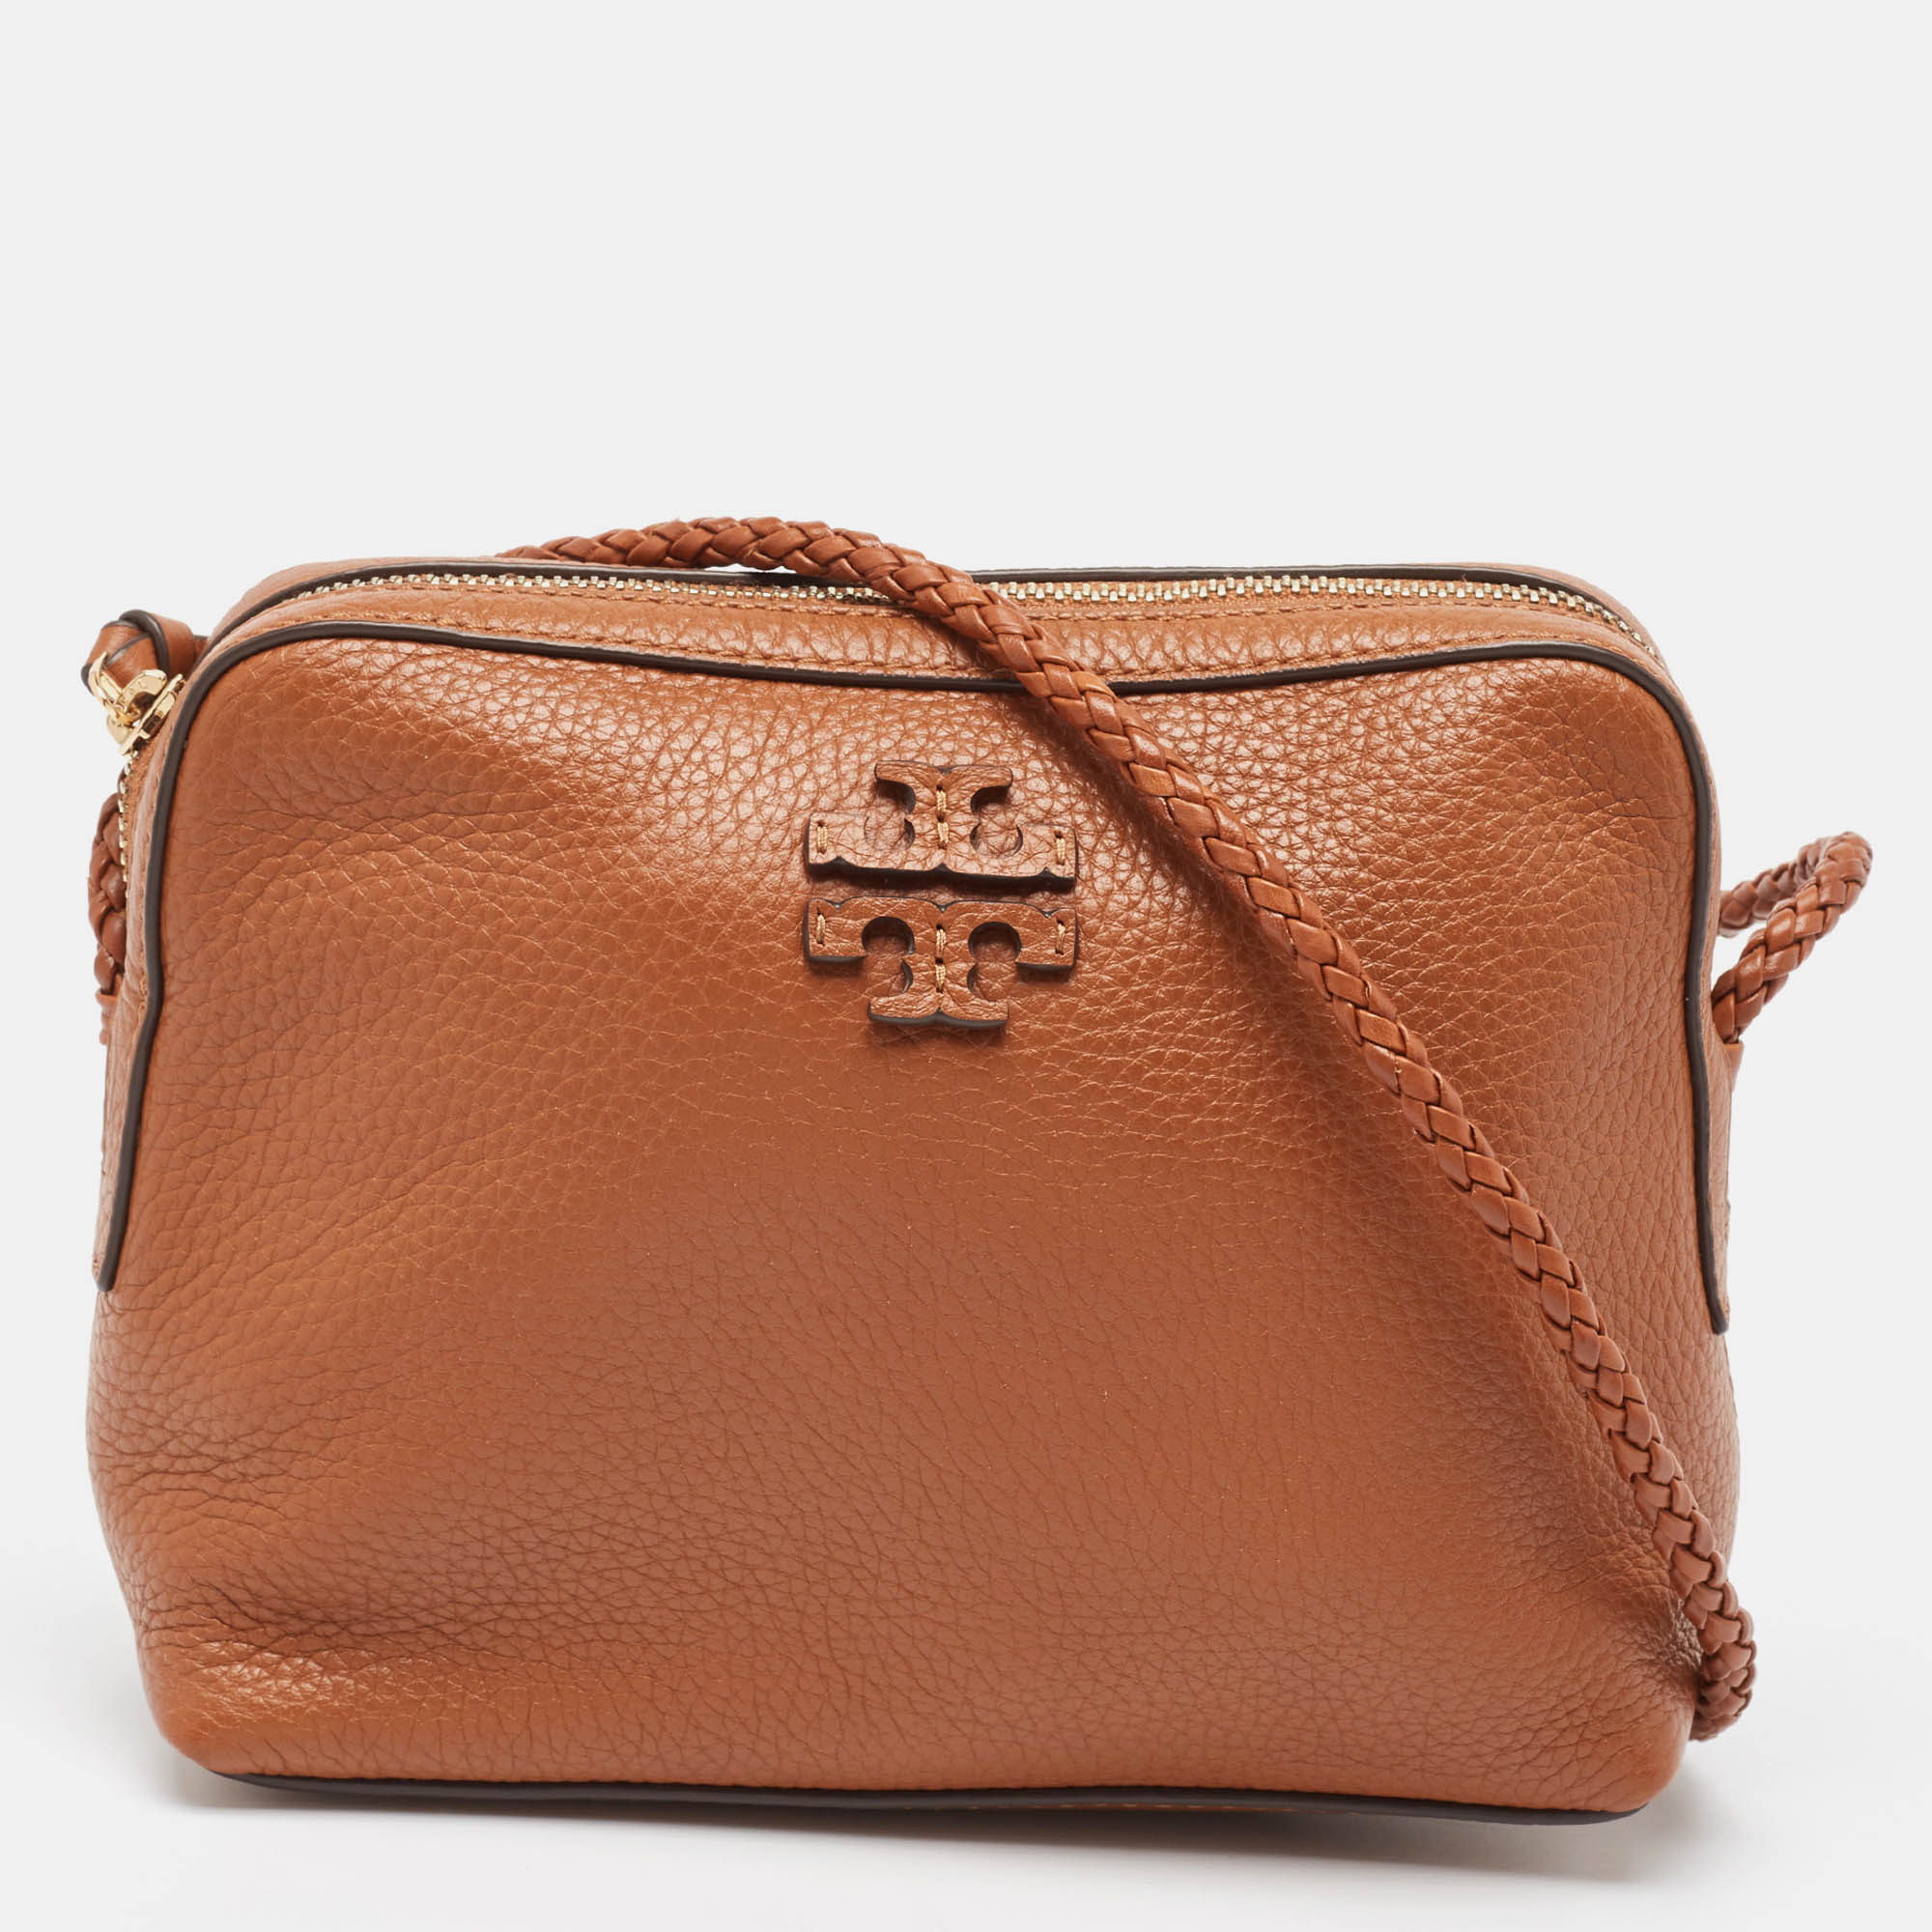 Pre-owned Tory Burch Brown Leather Taylor Crossbody Bag